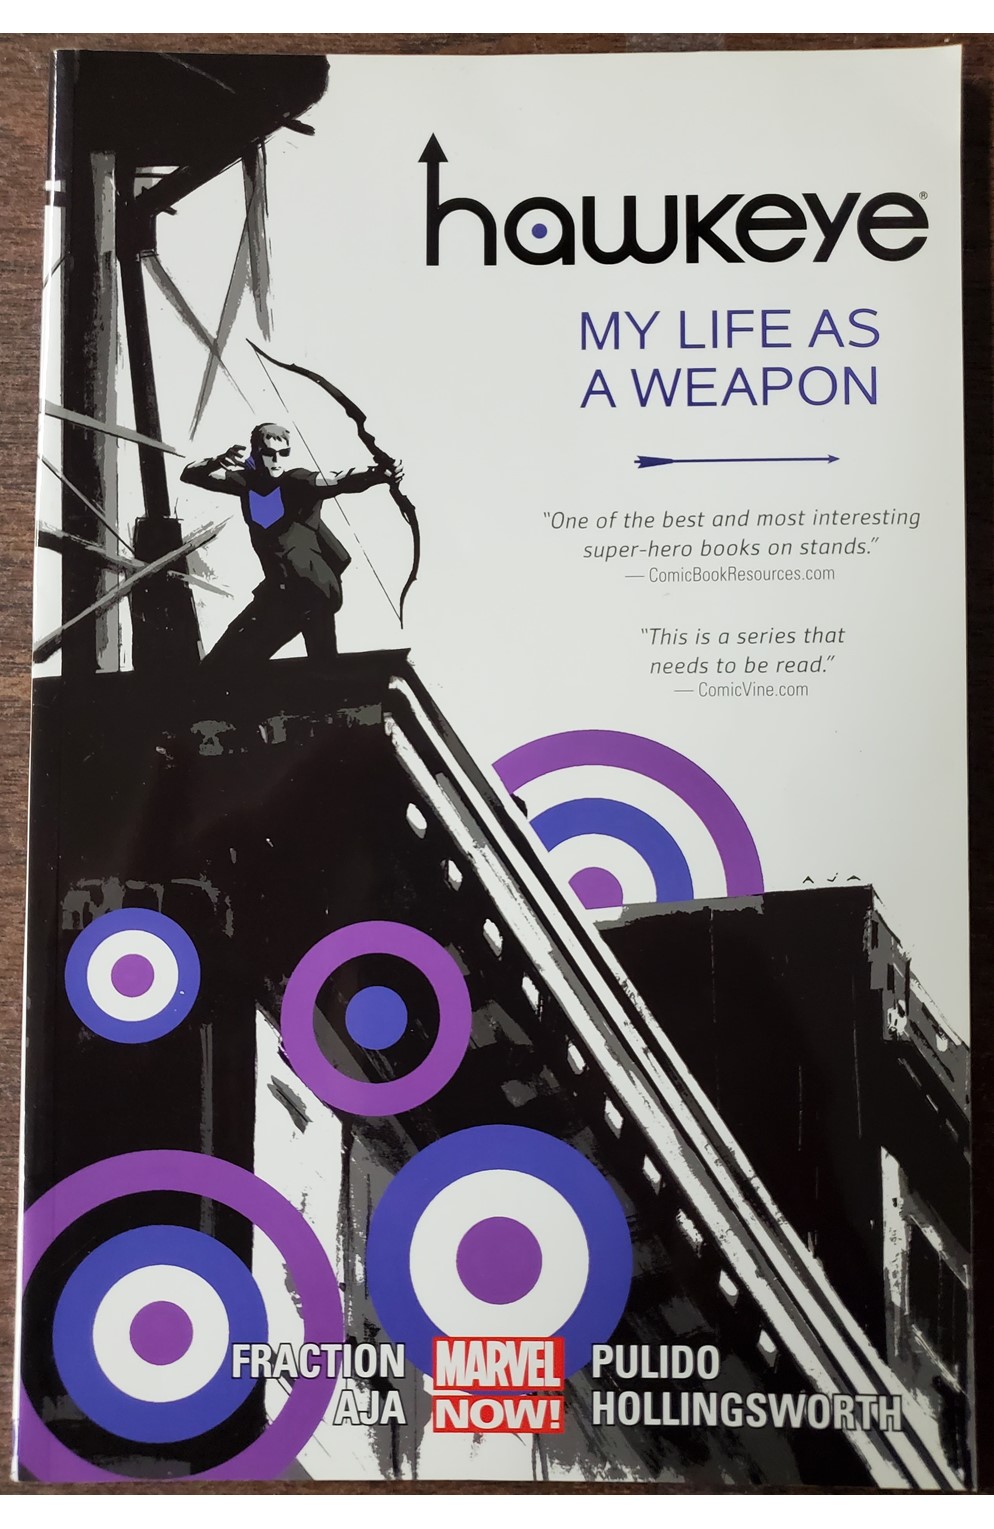 Hawkeye Volume 1 My Life As A Weapon Graphic Novel (Marvel 2013) Used - Good